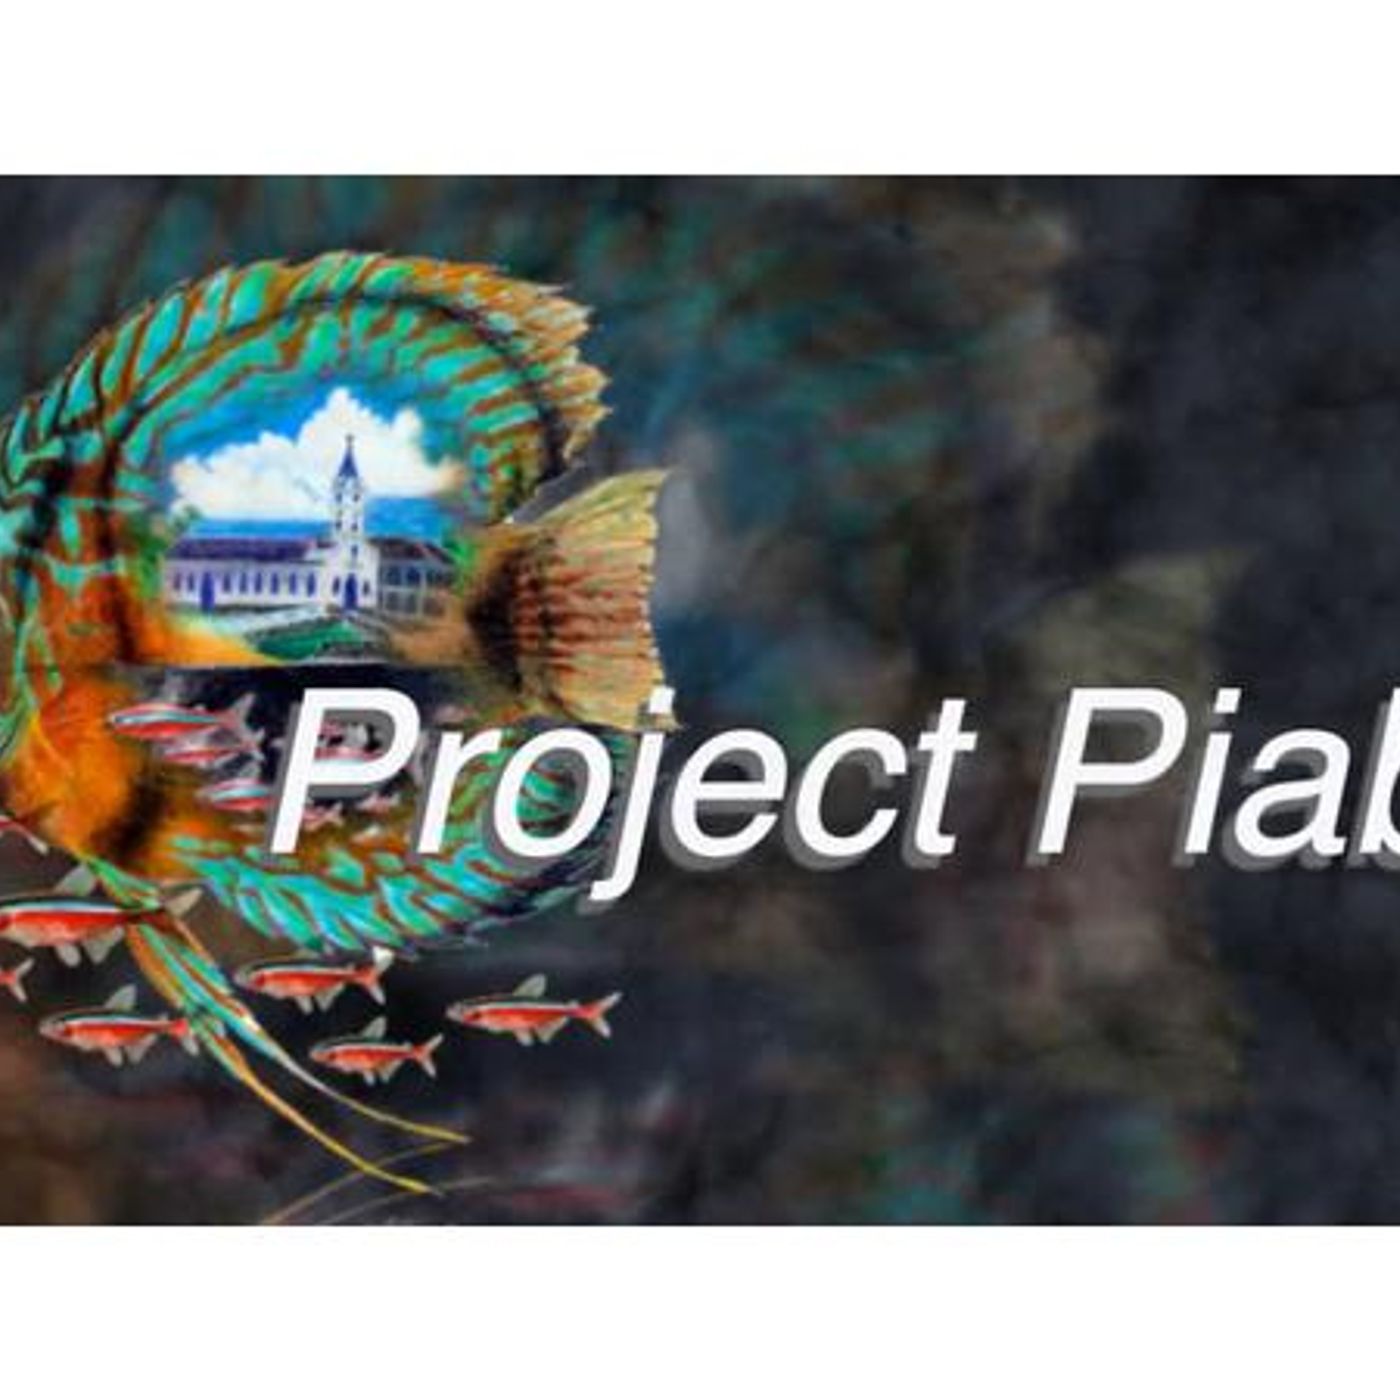 Project Piaba Buy A Fish Save A Tree